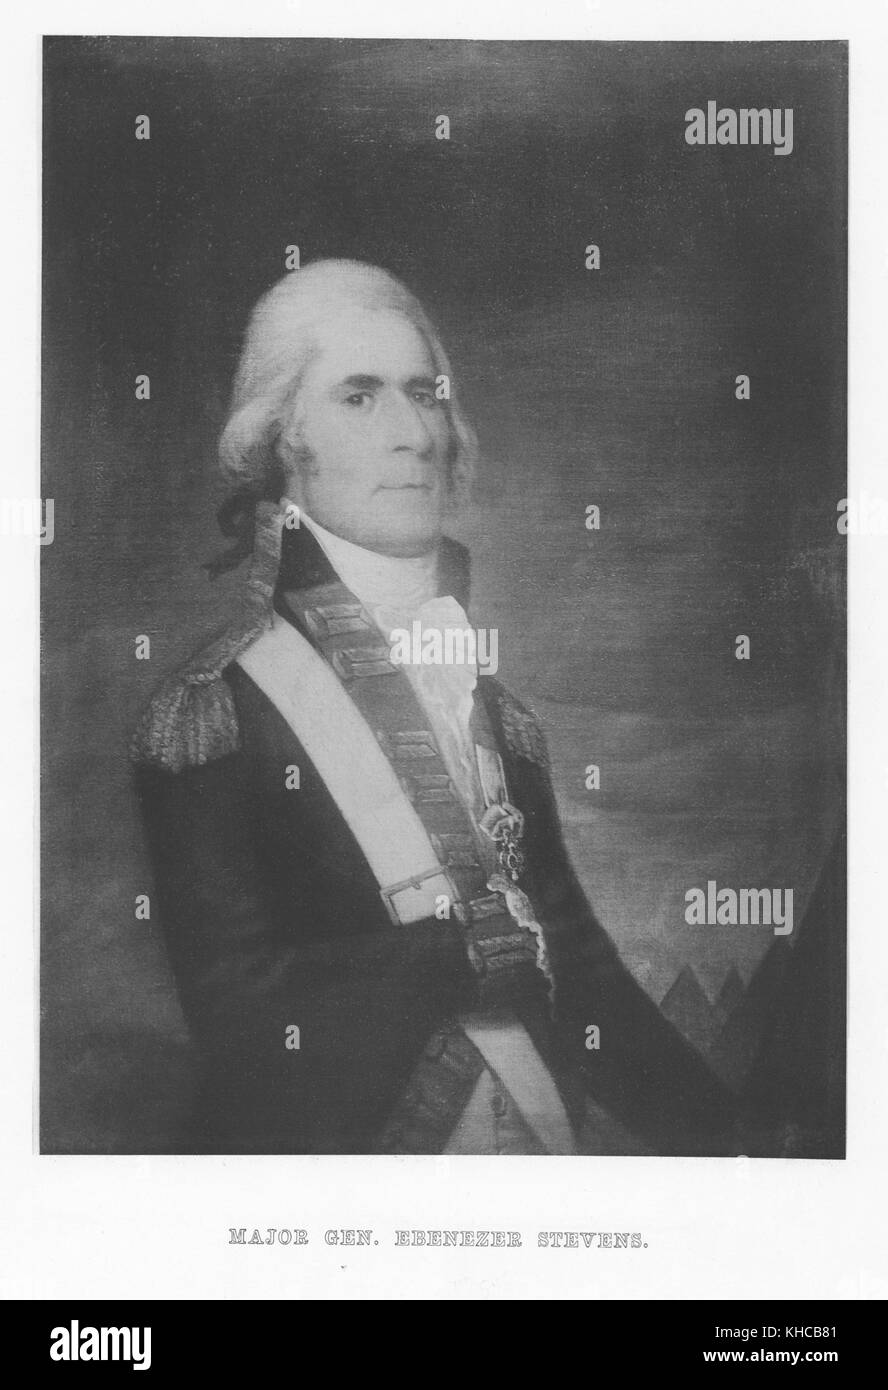 Half length engraved portrait of Major General Ebenezer Stevens, lieutenant colonel in the Continental Army during the American Revolution, 1900. From the New York Public Library. Stock Photo